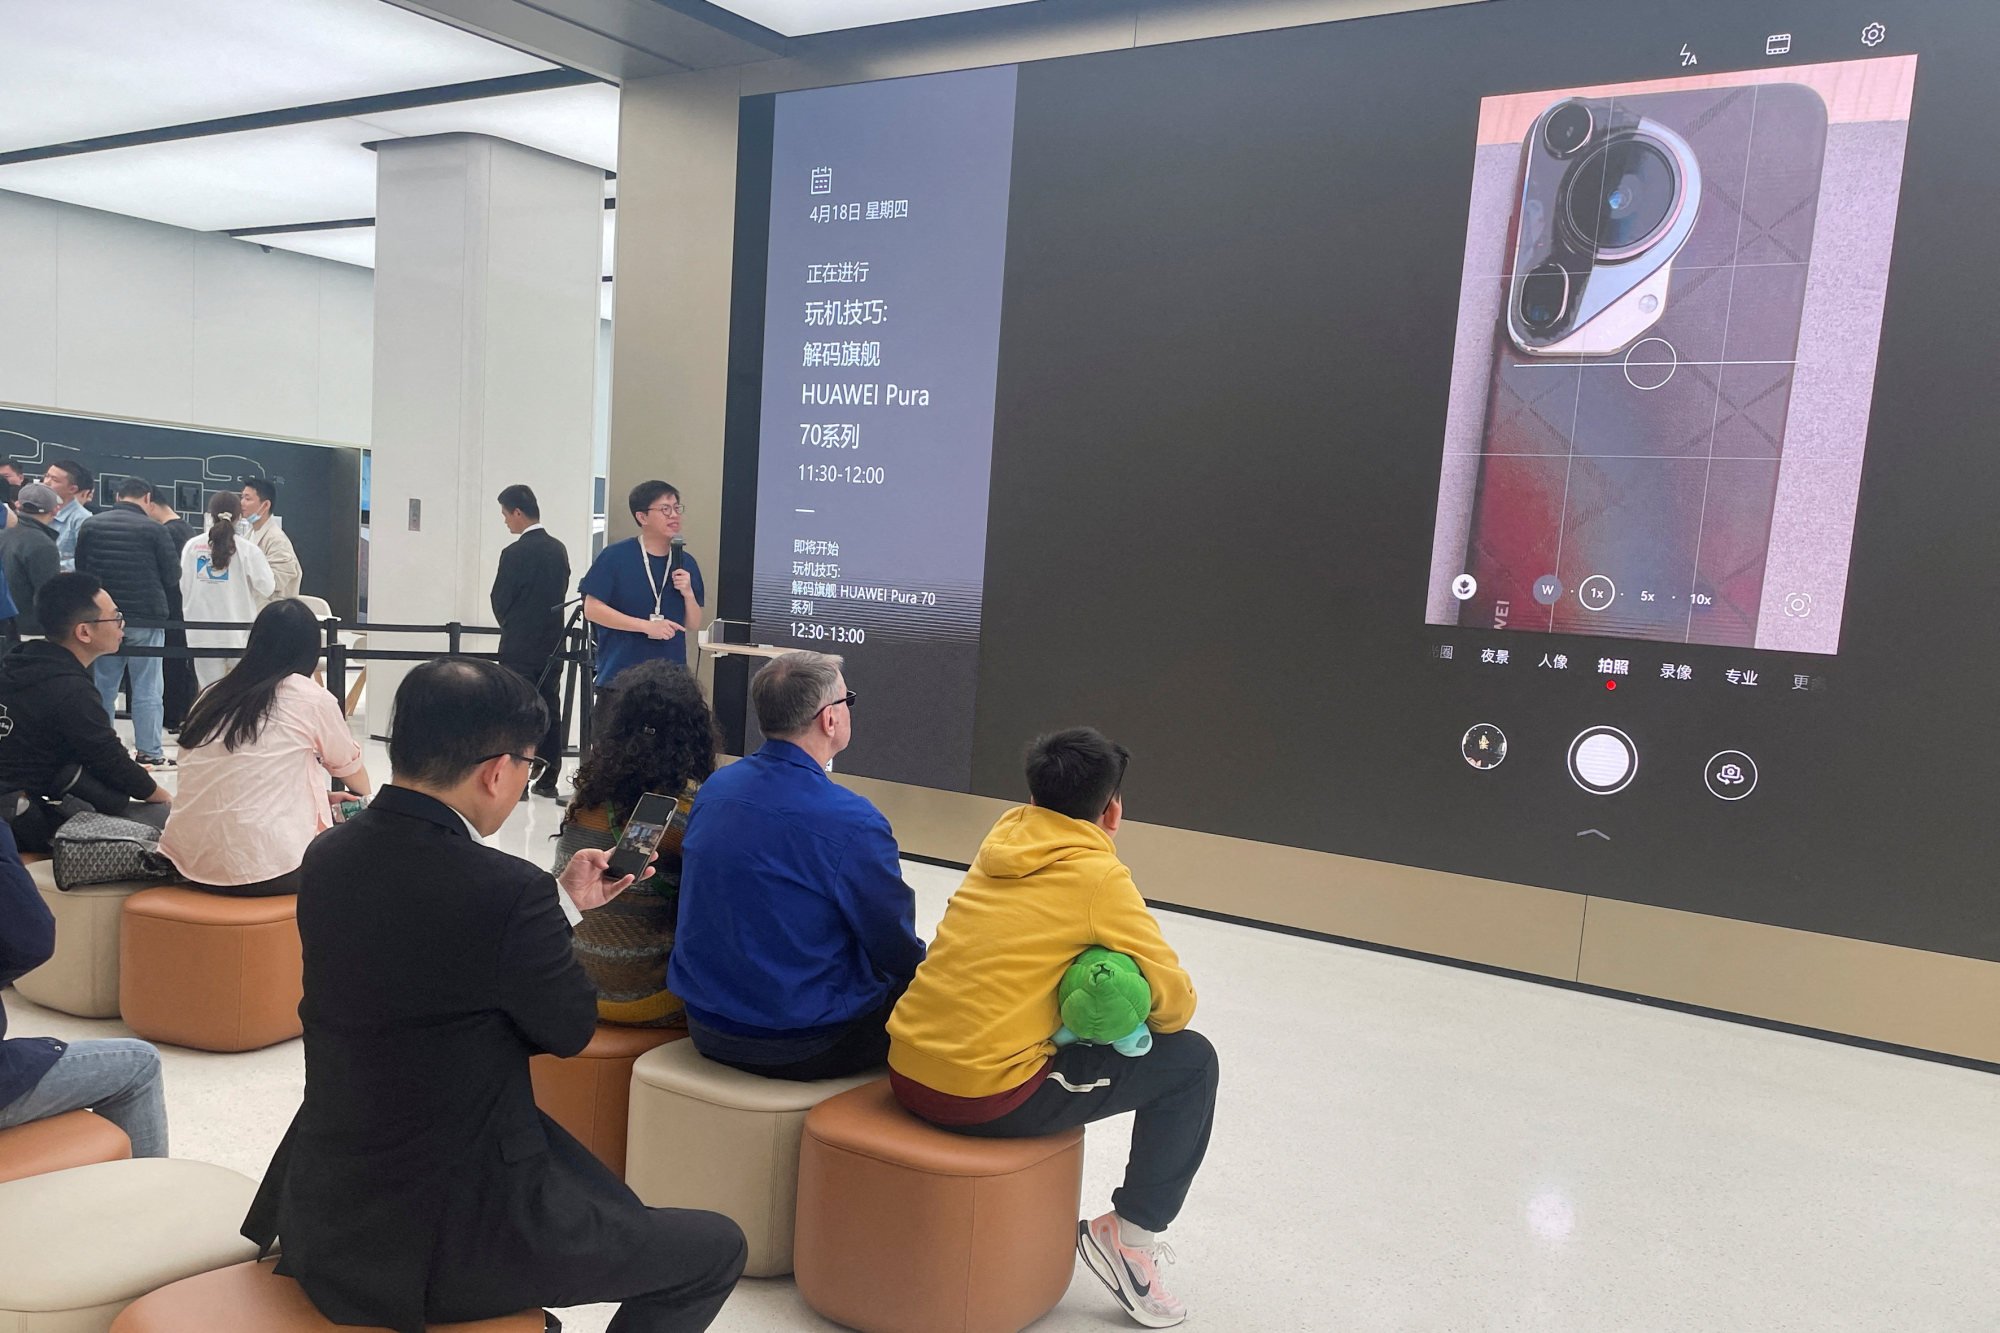 Customers listen to staff introducing Huawei’s new smartphones at the brand’s flagship store in Shanghai, China. Photo: Reuters